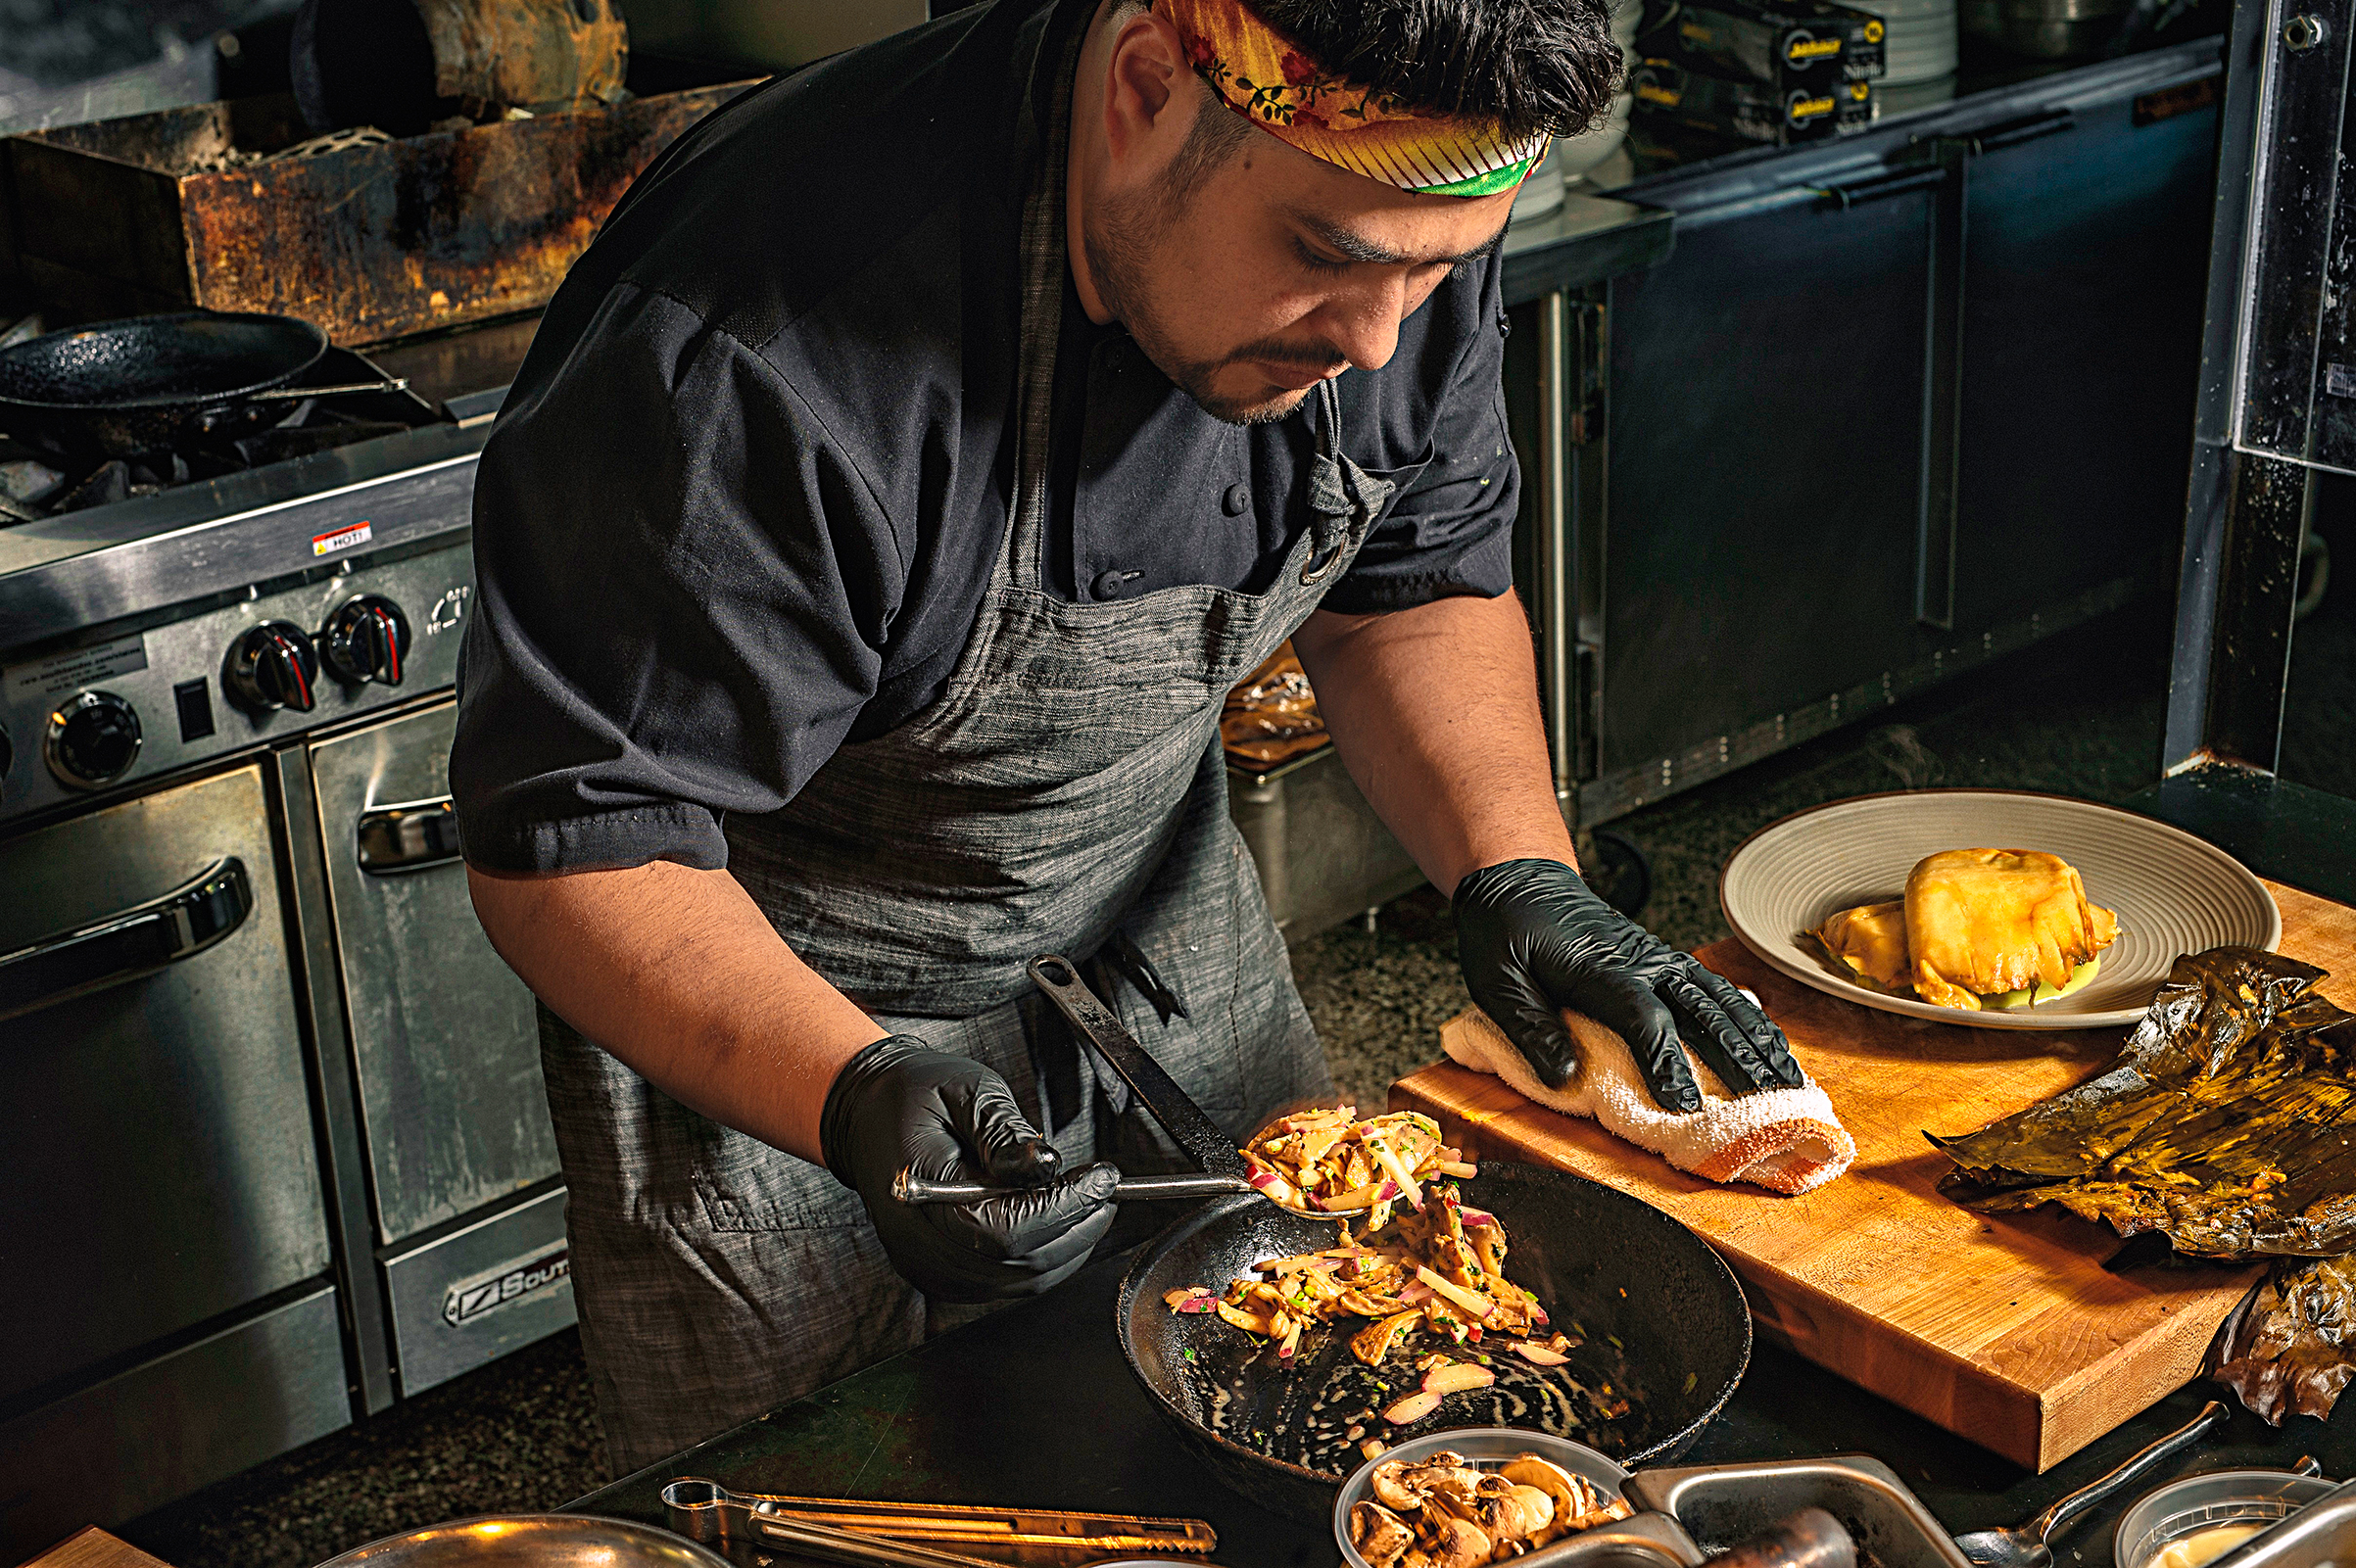 Oscar Diaz of the Cortez in Raleigh, N.C., which has become an exemplar of new Southern cuisine (Mike Belleme for TIME)